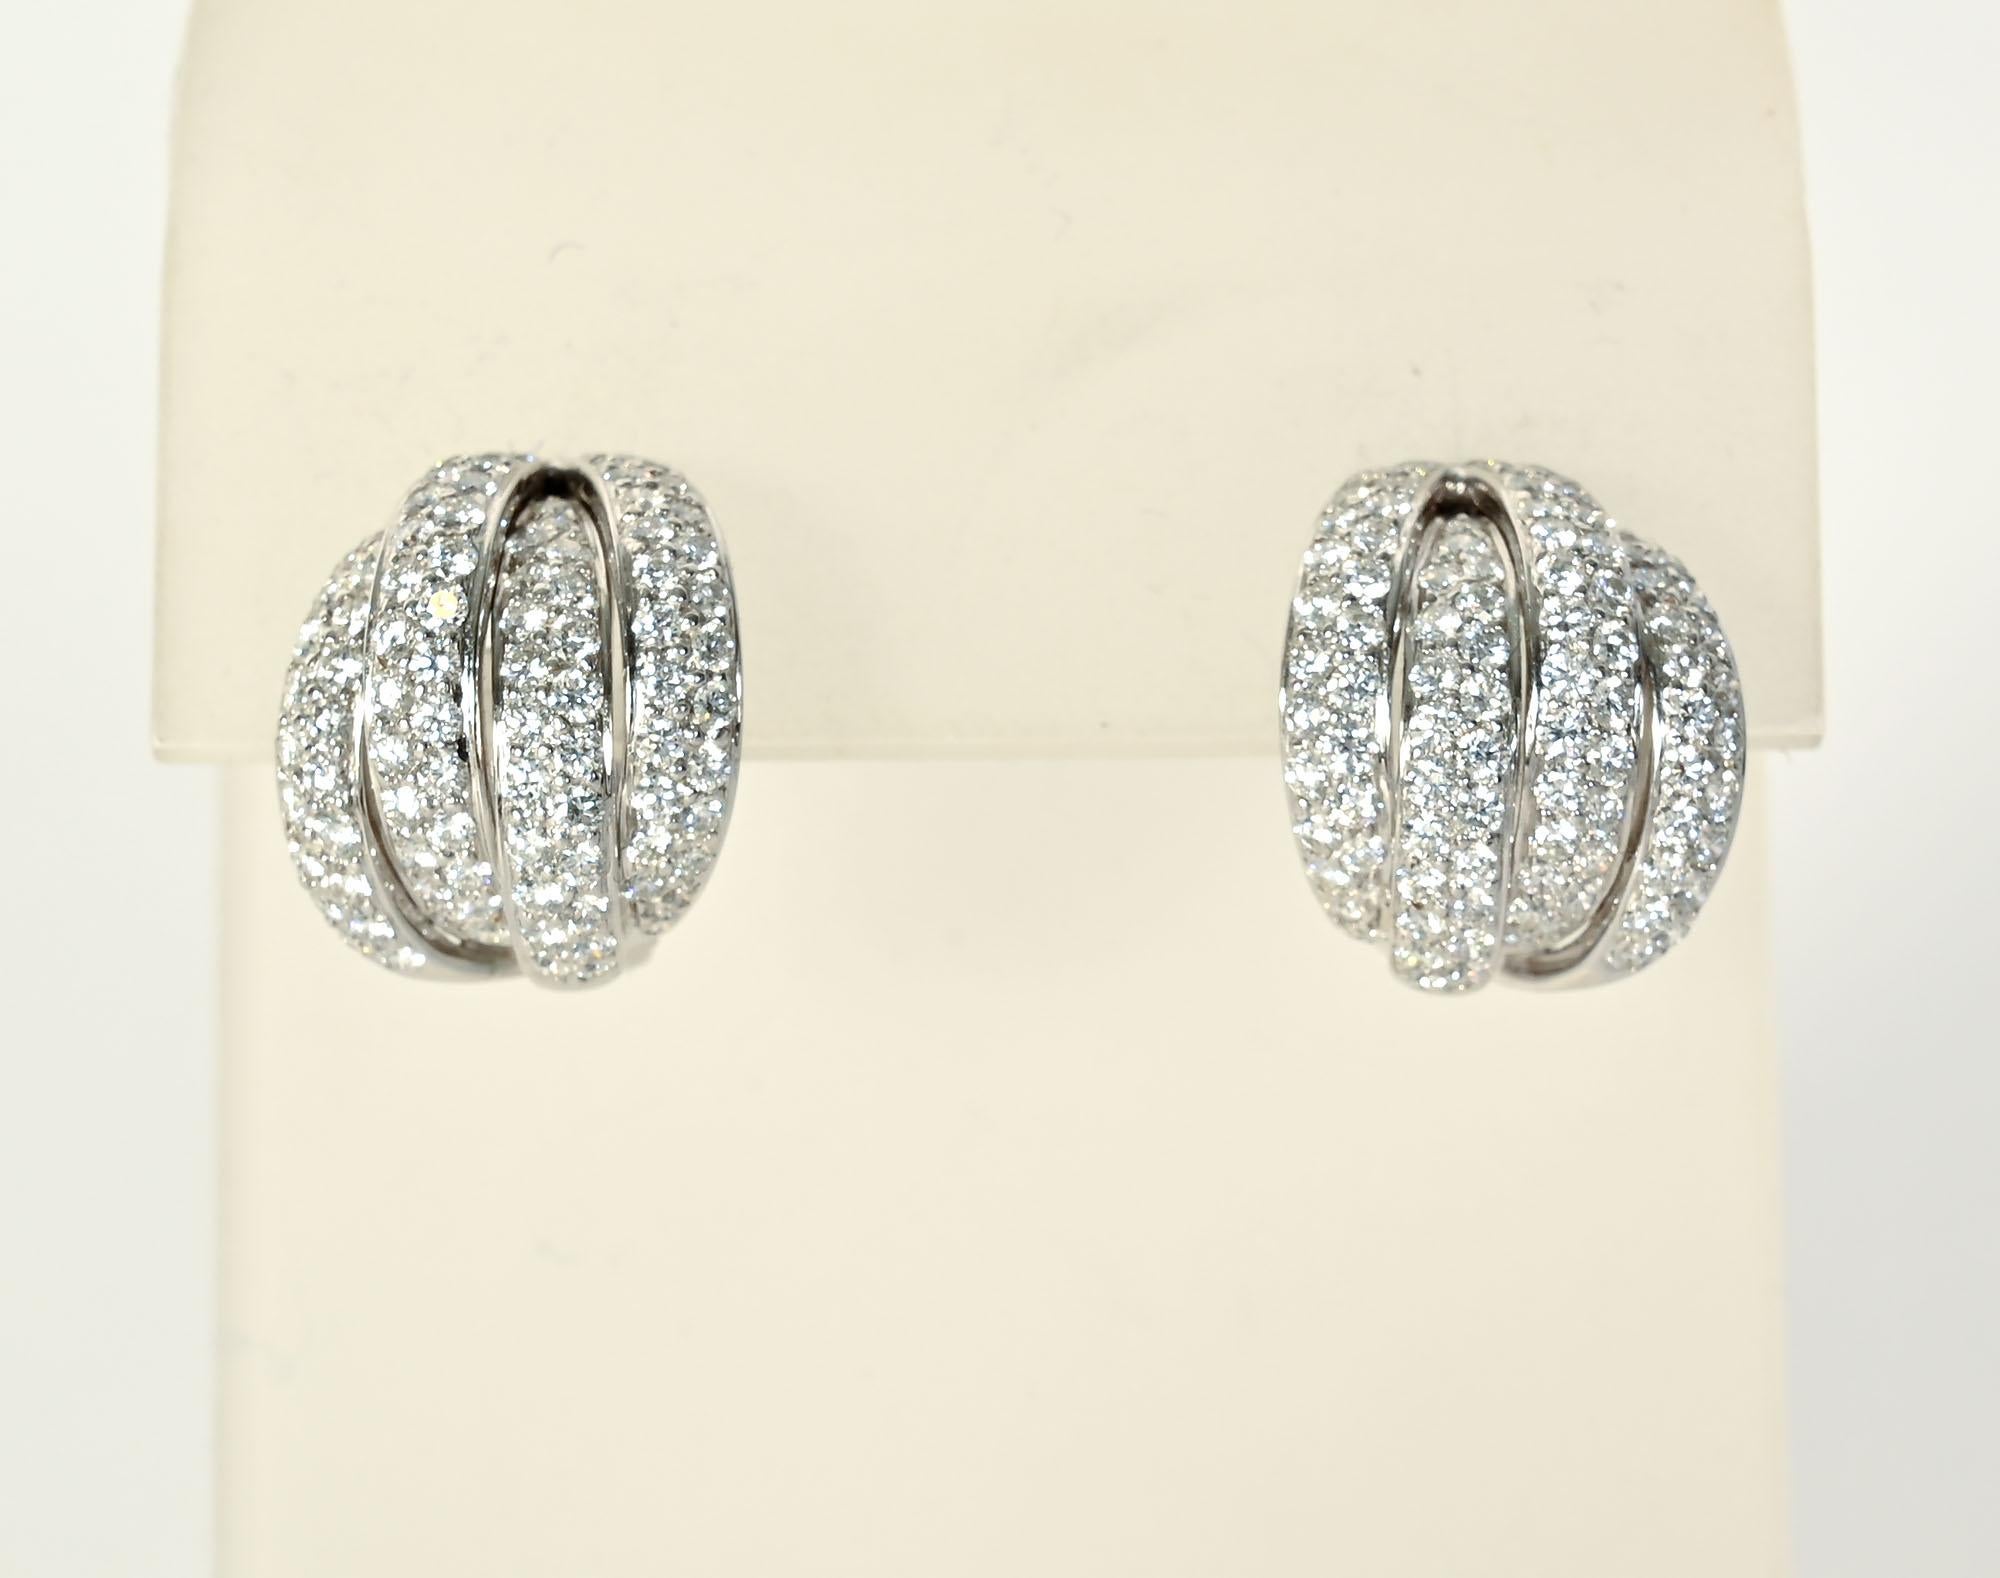 These diamond earrings are small but have a lot of impact. Four overlapping hoops of white gold show off the 100 diamonds that weigh a total of 2.5 carats. The stones are VS quality; H color. Backs are posts and clips that can be modified to all one